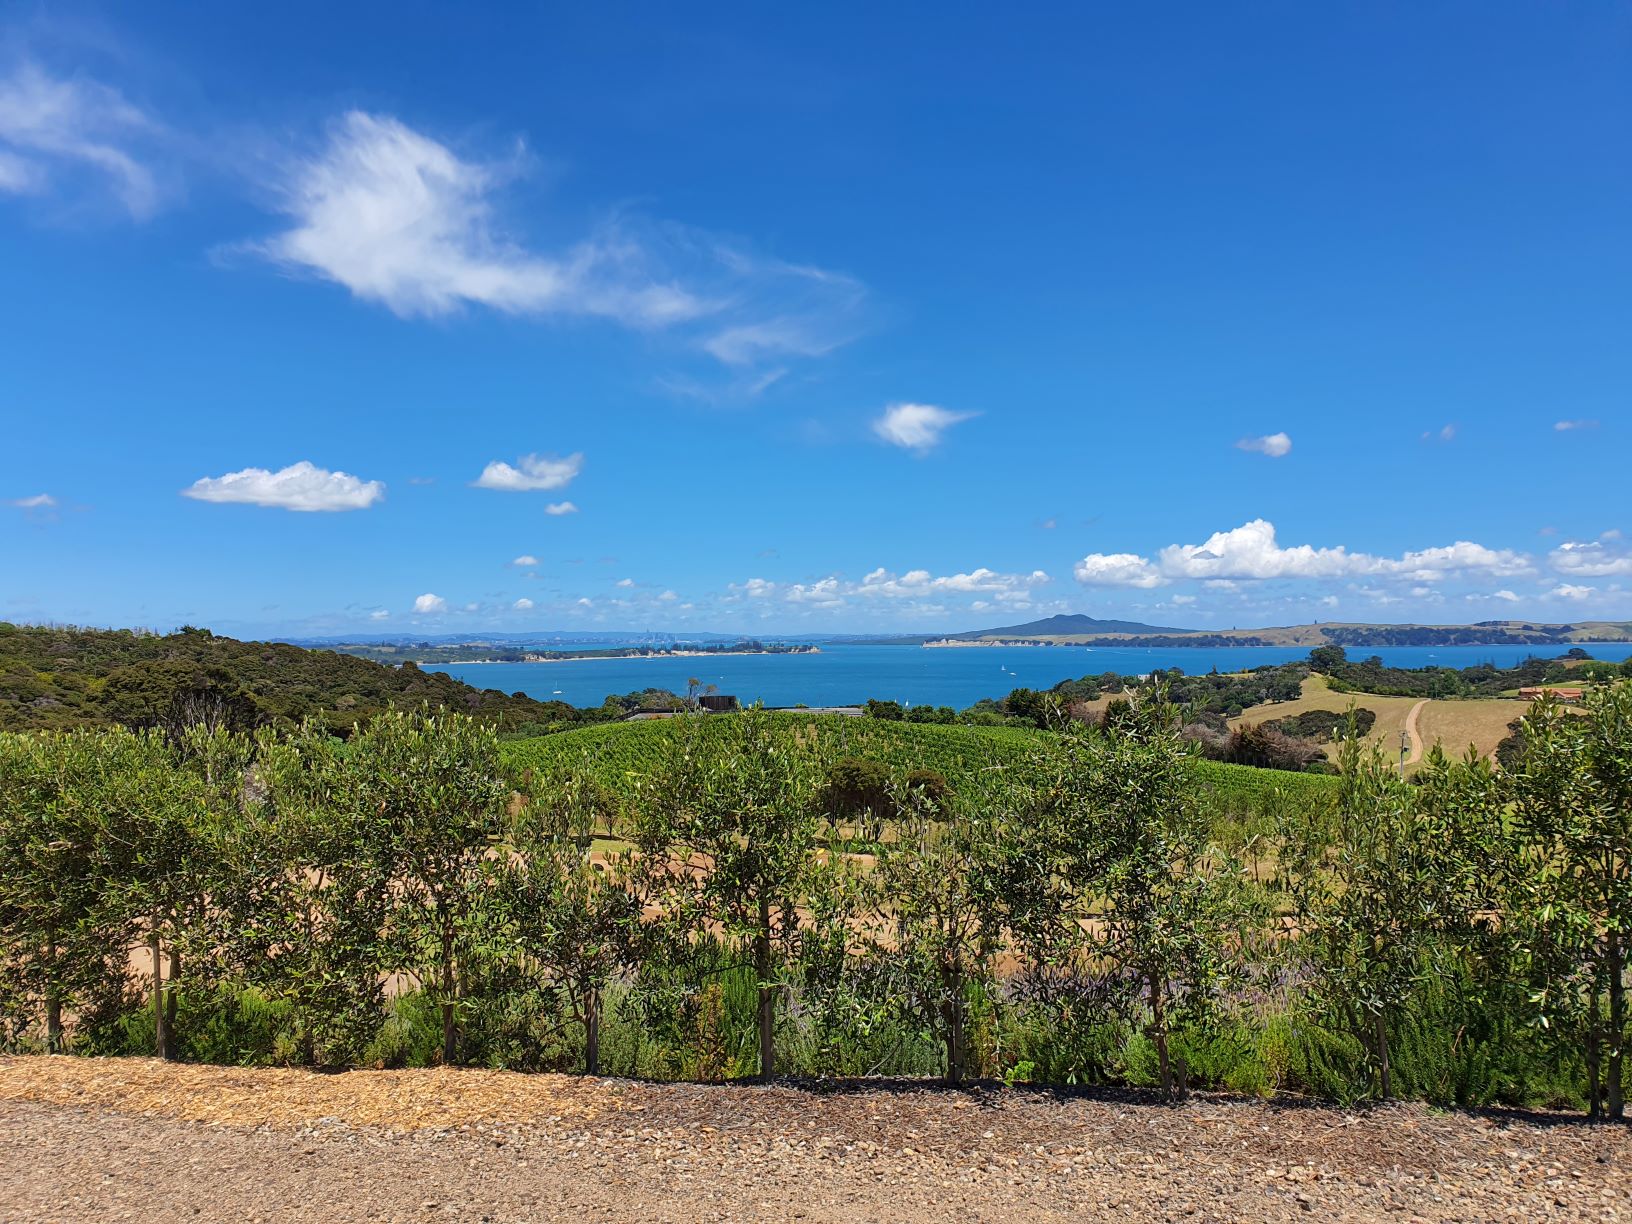 The view from Mudbrick Winery